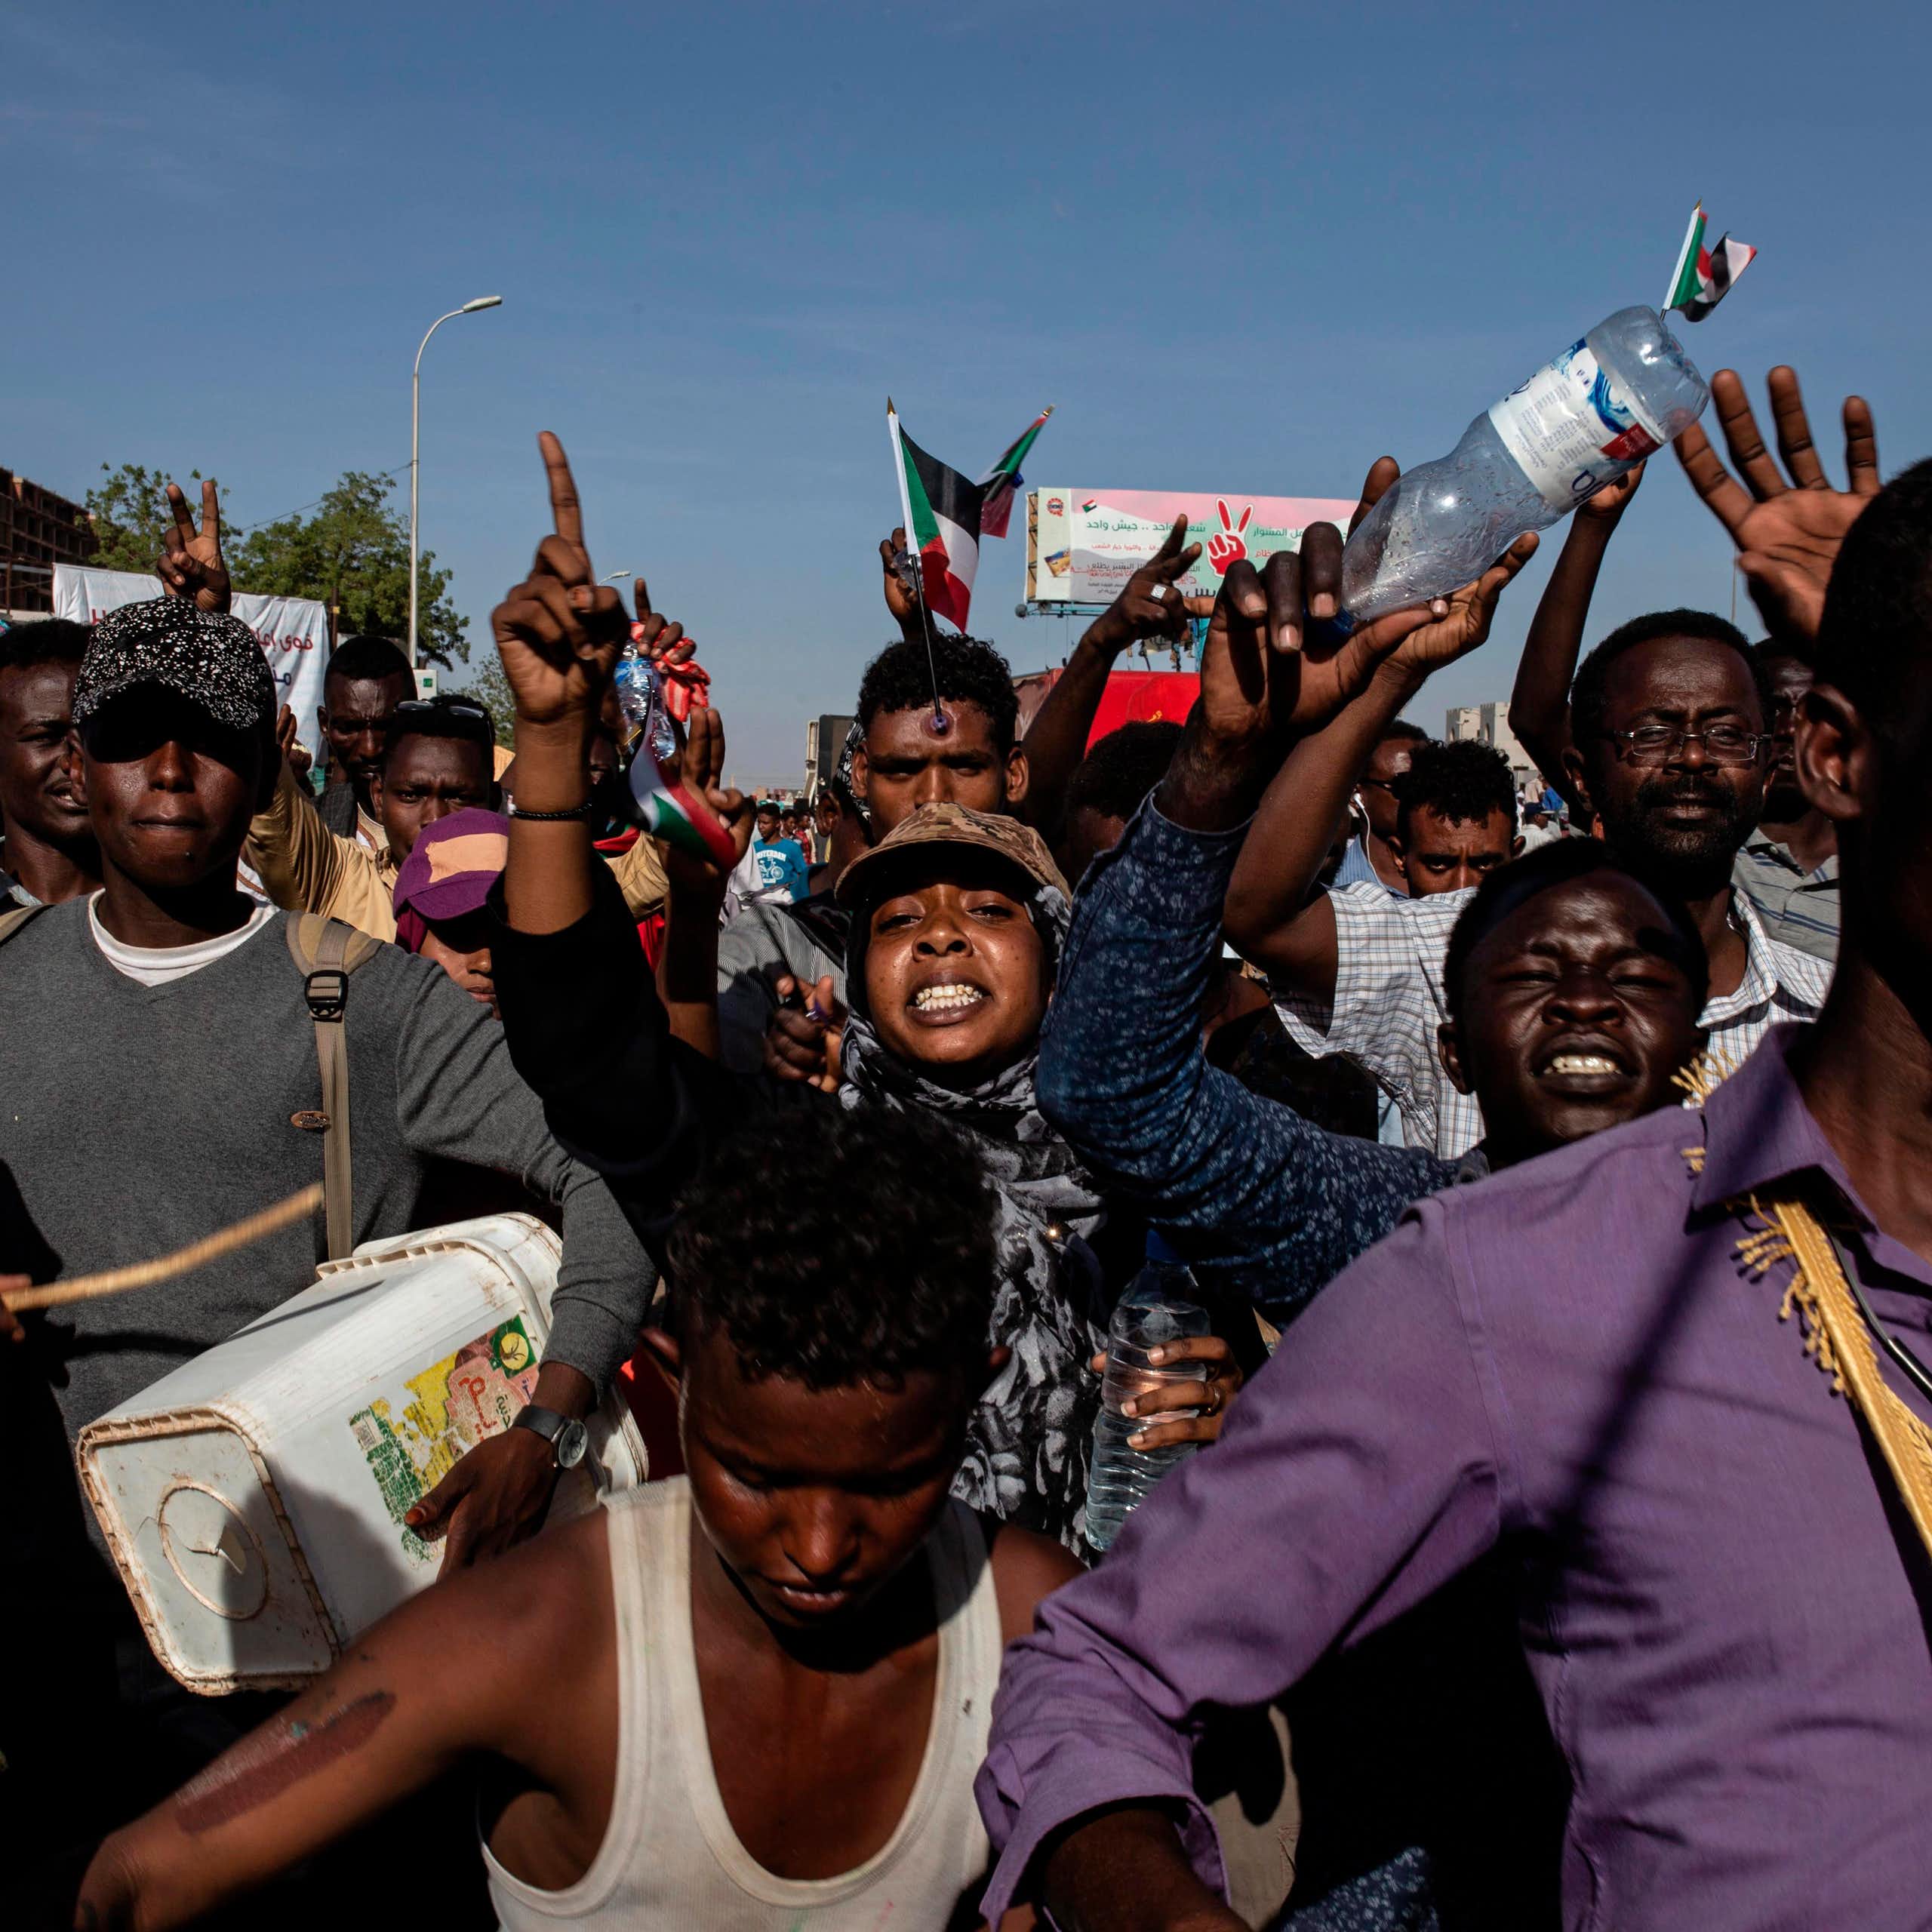 As war rages in Sudan, community resistance groups sustain life